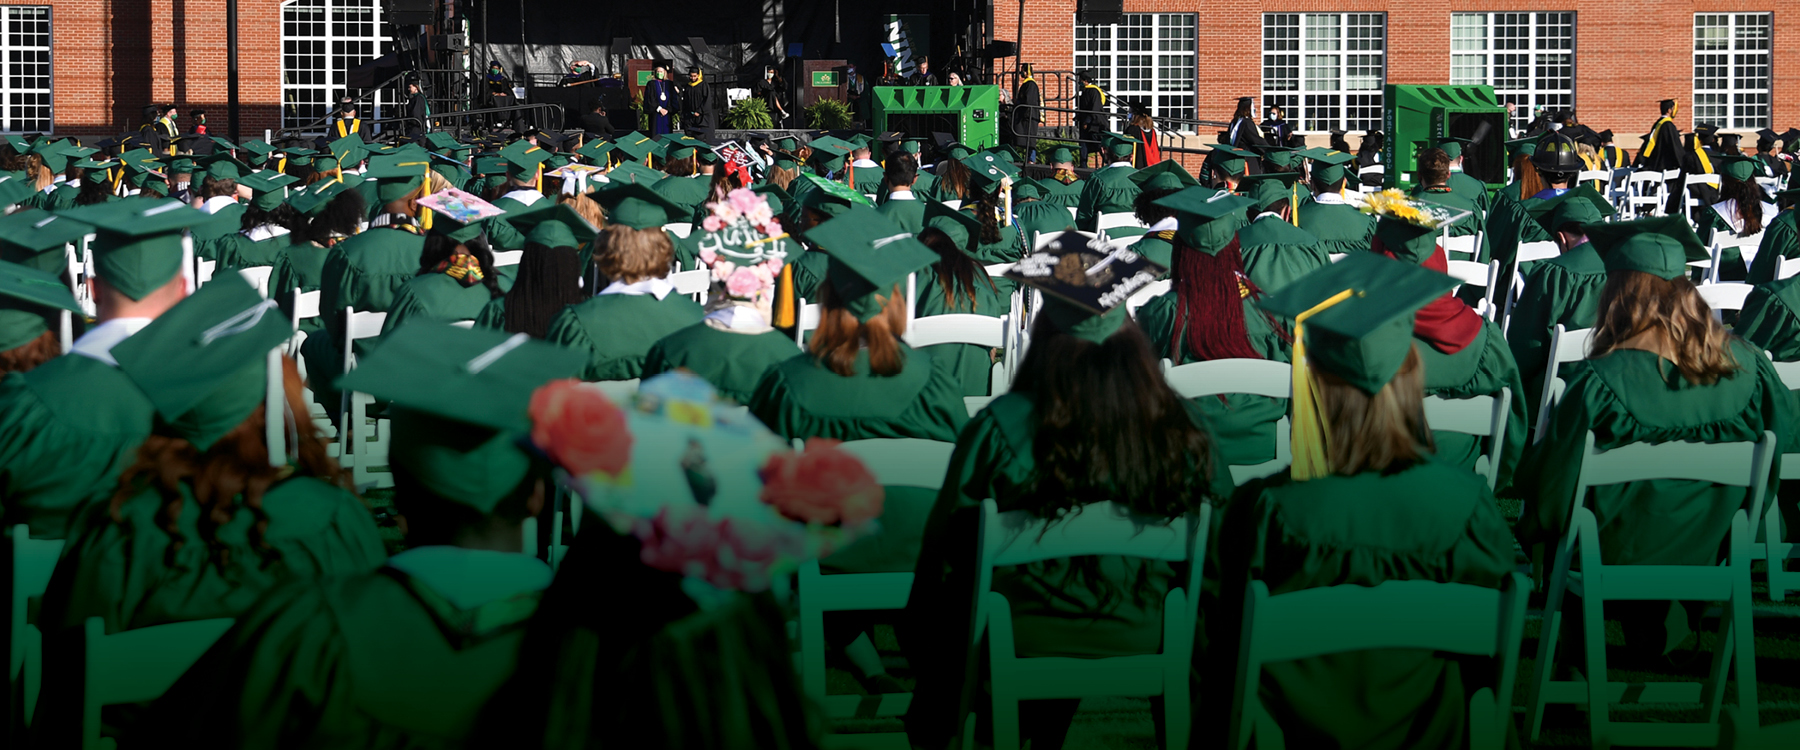 With the latest national statistics on student-loan debt showing that 45 million student borrowers collectively owe more than $1.7 trillion, UNC Charlotte graduates have among the lowest student-loan debt of college graduates in North Carolina and across the nation.